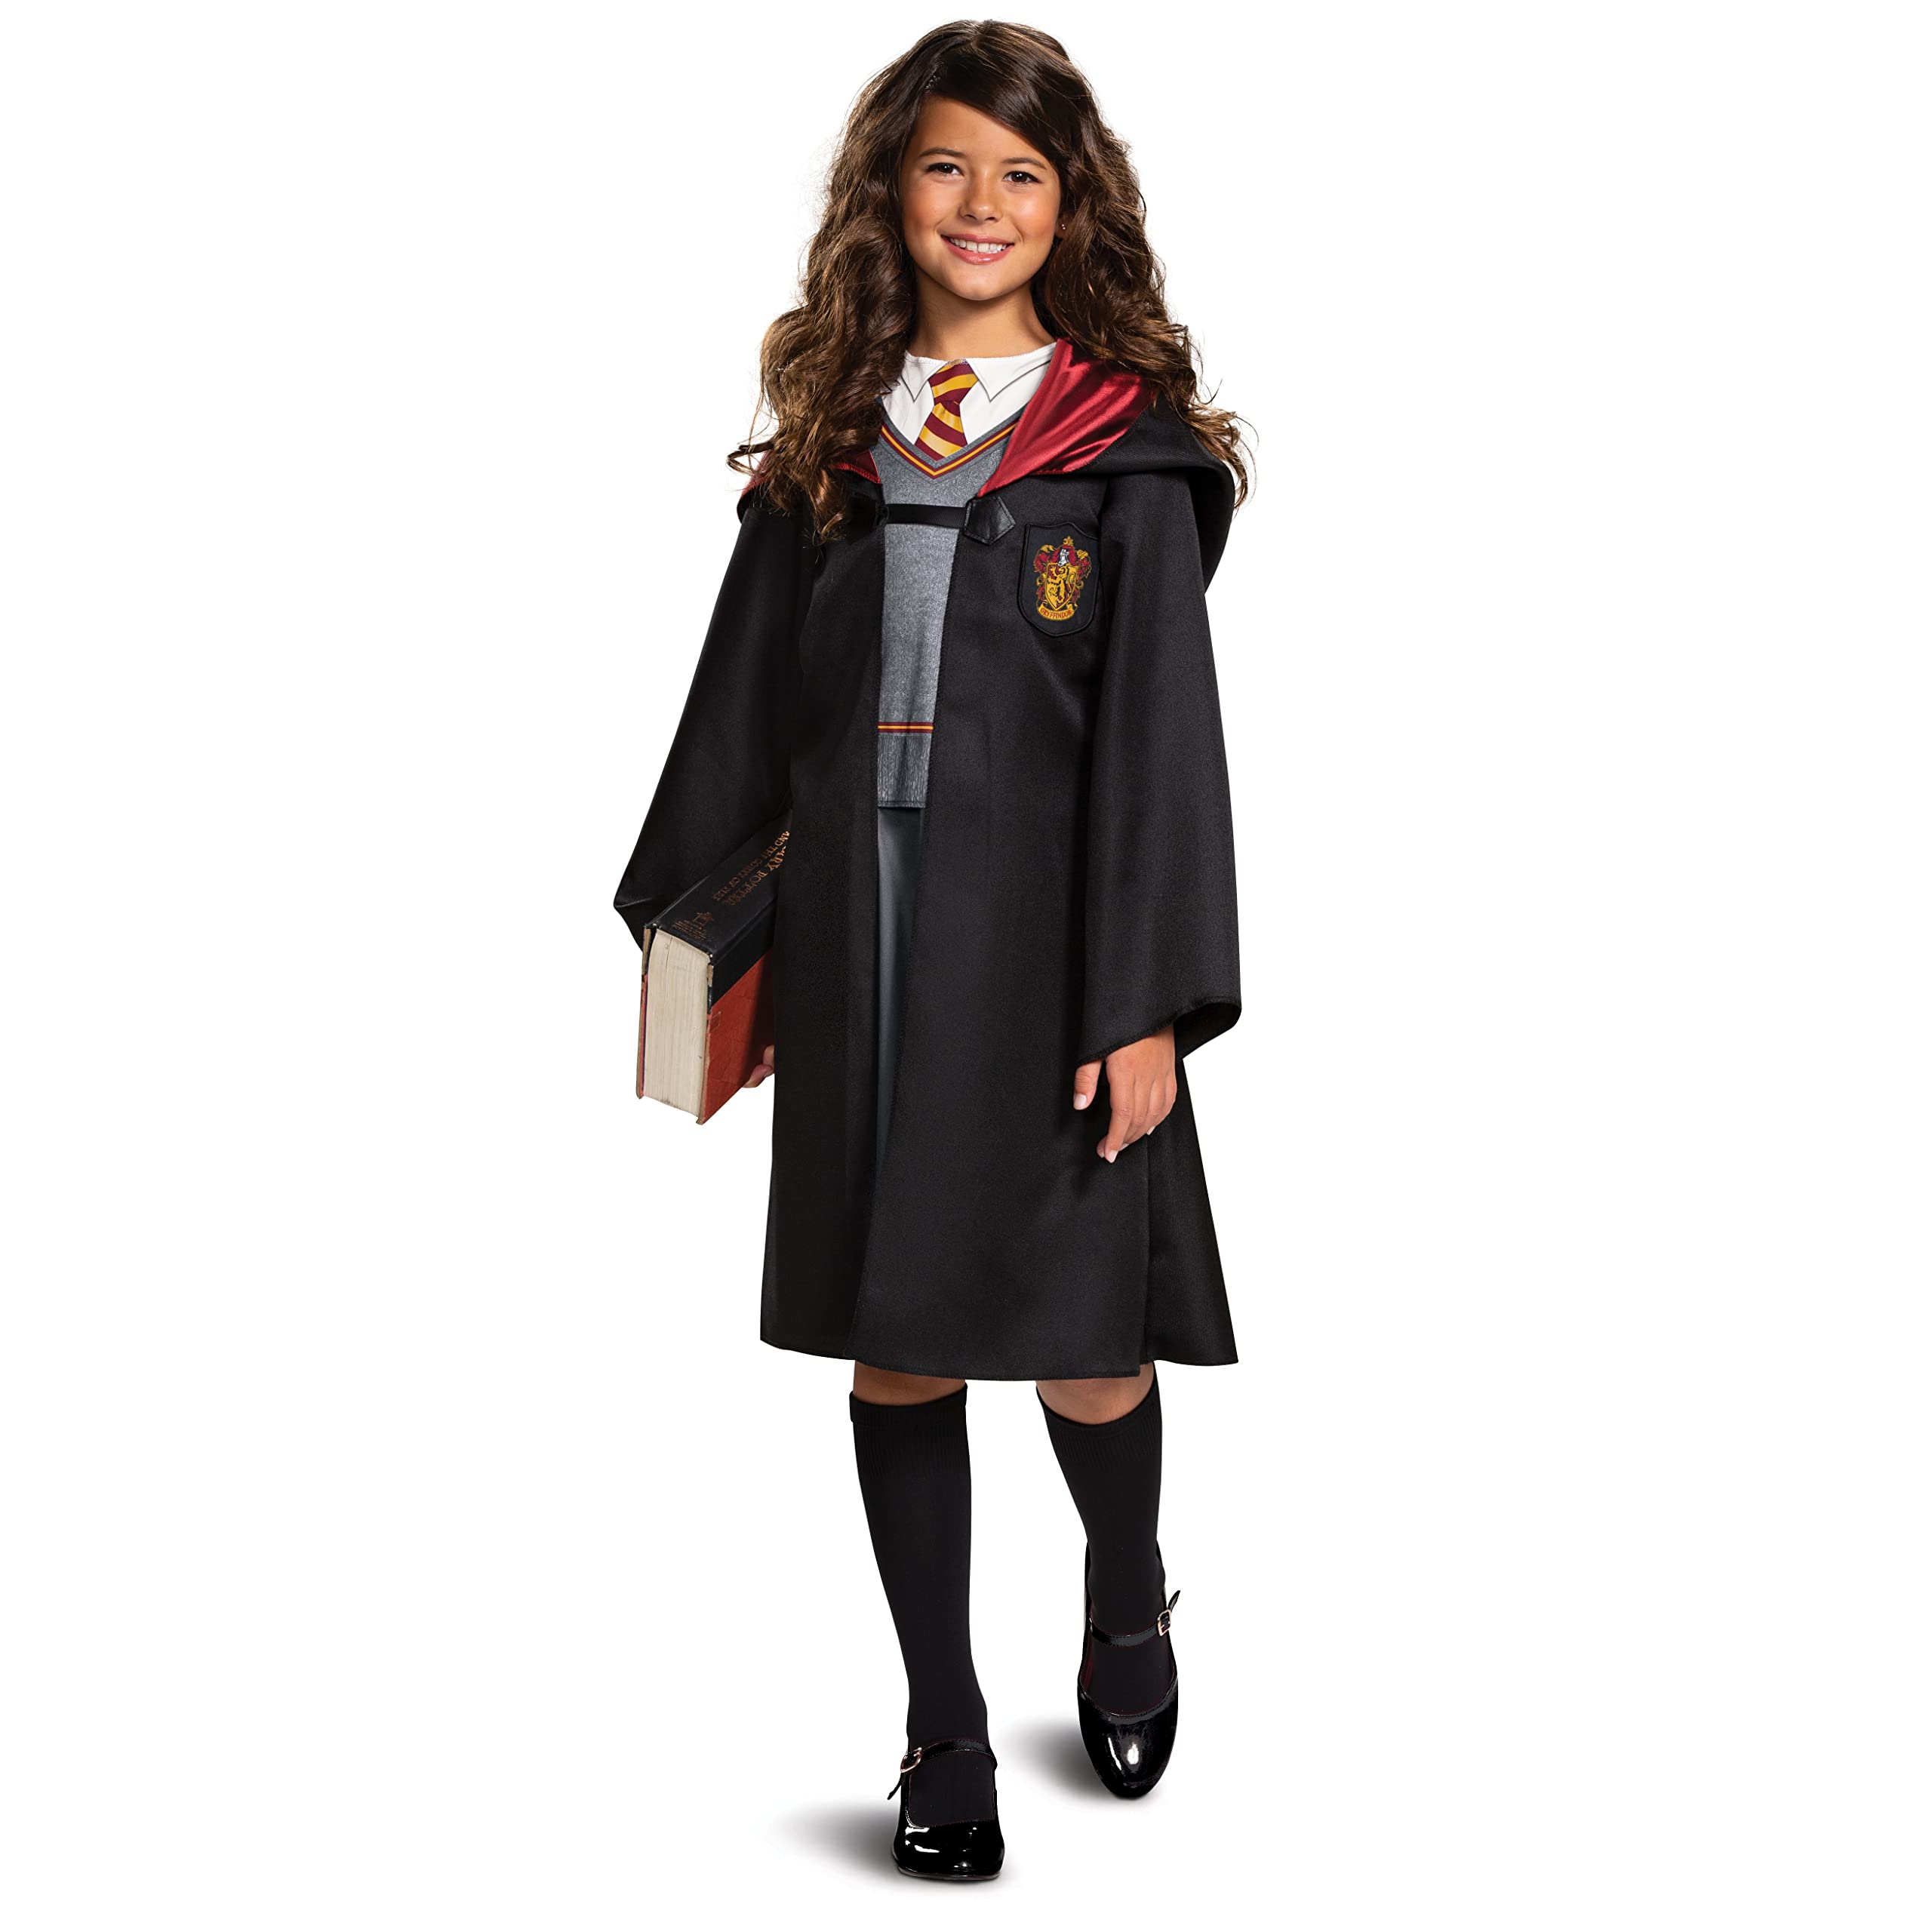 Hermione Granger Costume, Official Harry Potter Wizarding World Outfit for Kids, Classic Children's Size